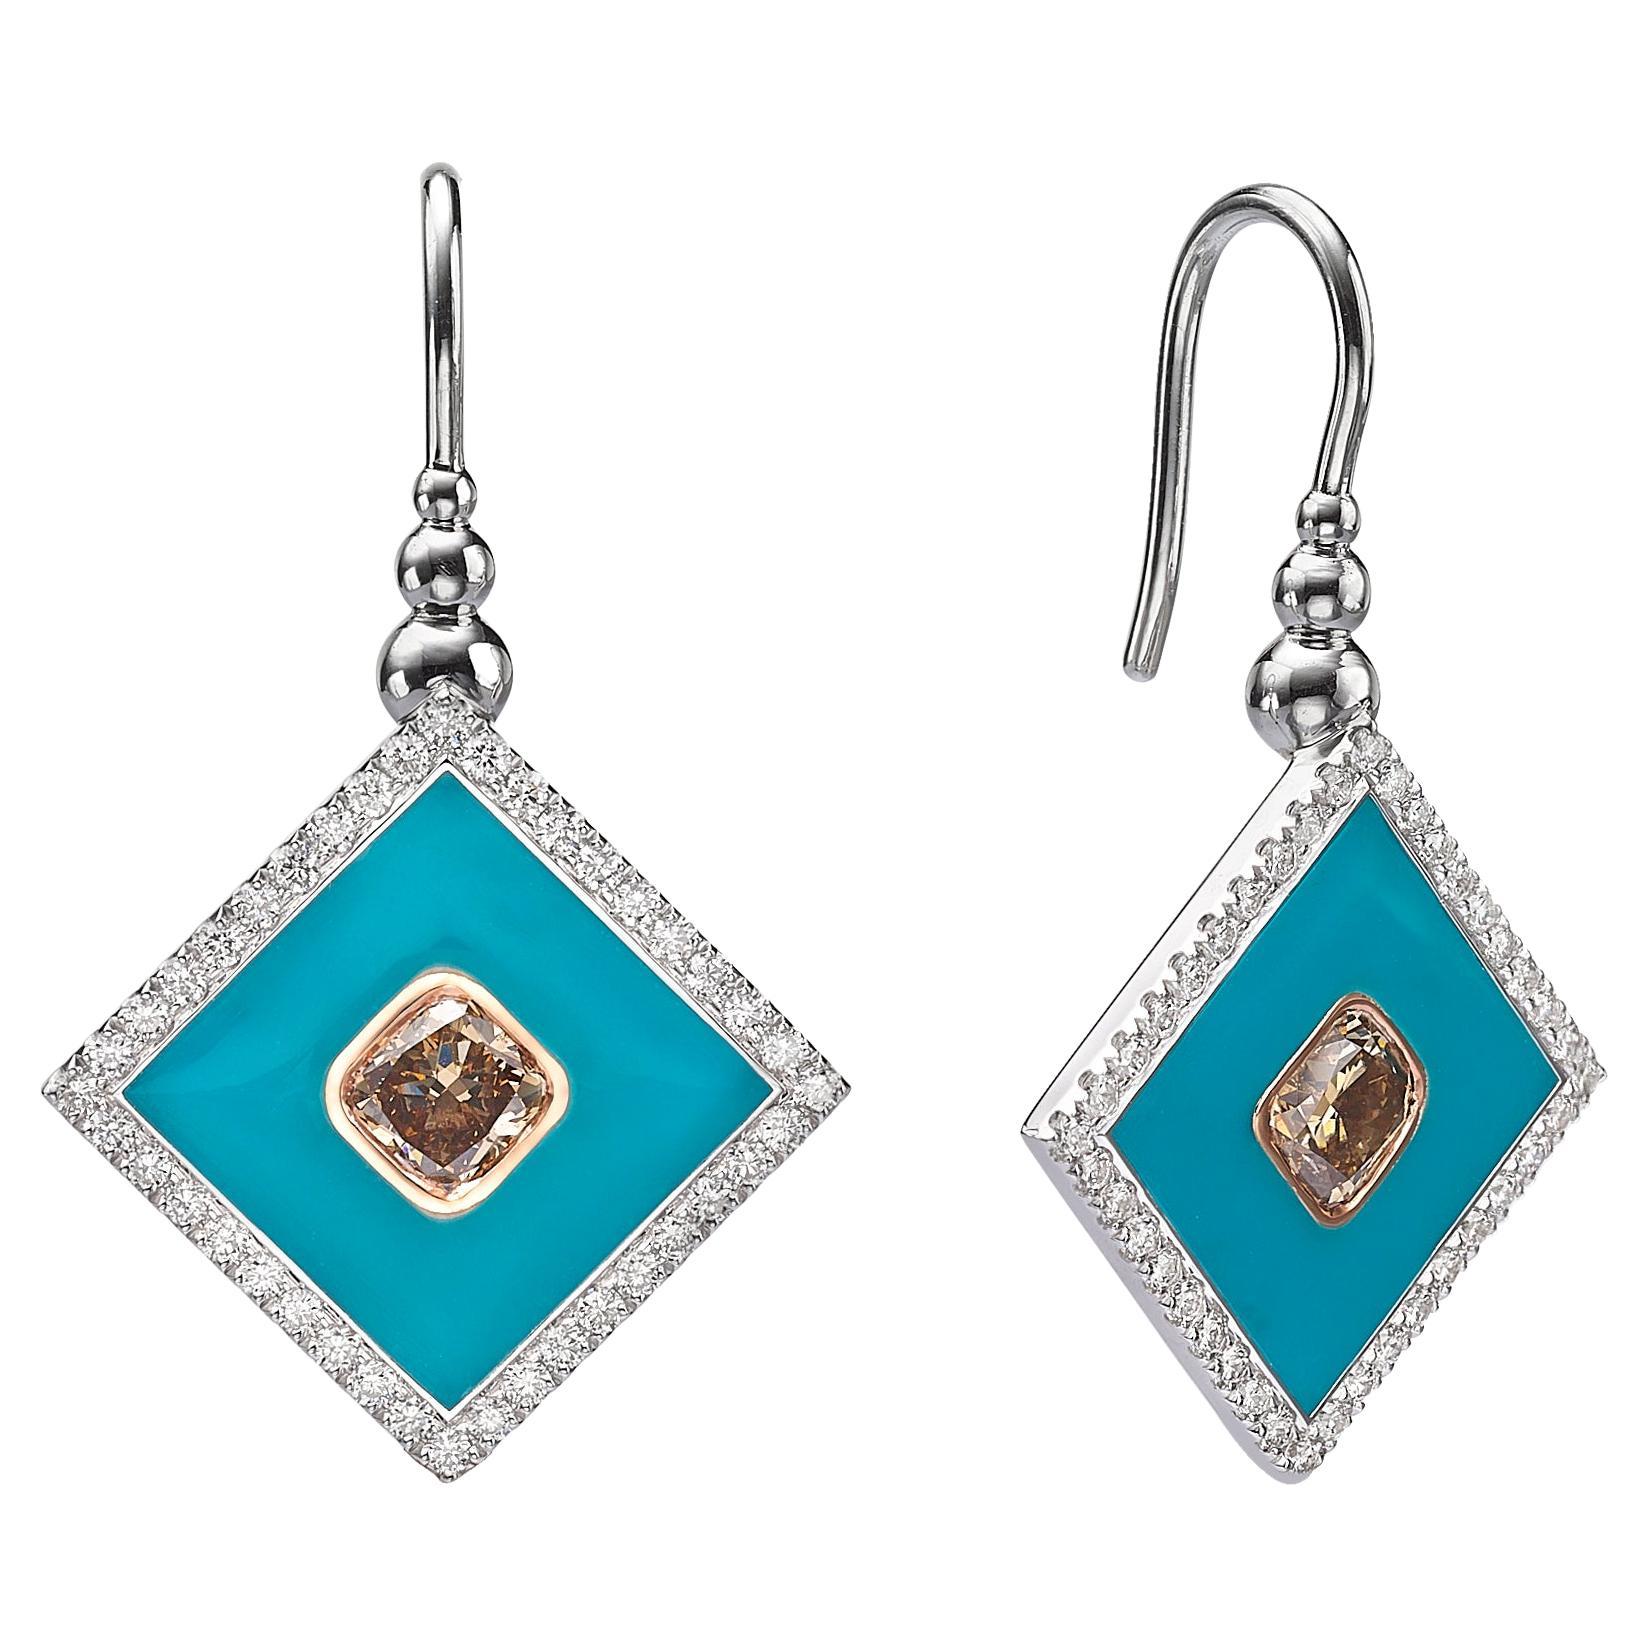 Venice Collection:Square-Shaped 18k White Gold Diamond Earrings with Blue Enamel For Sale